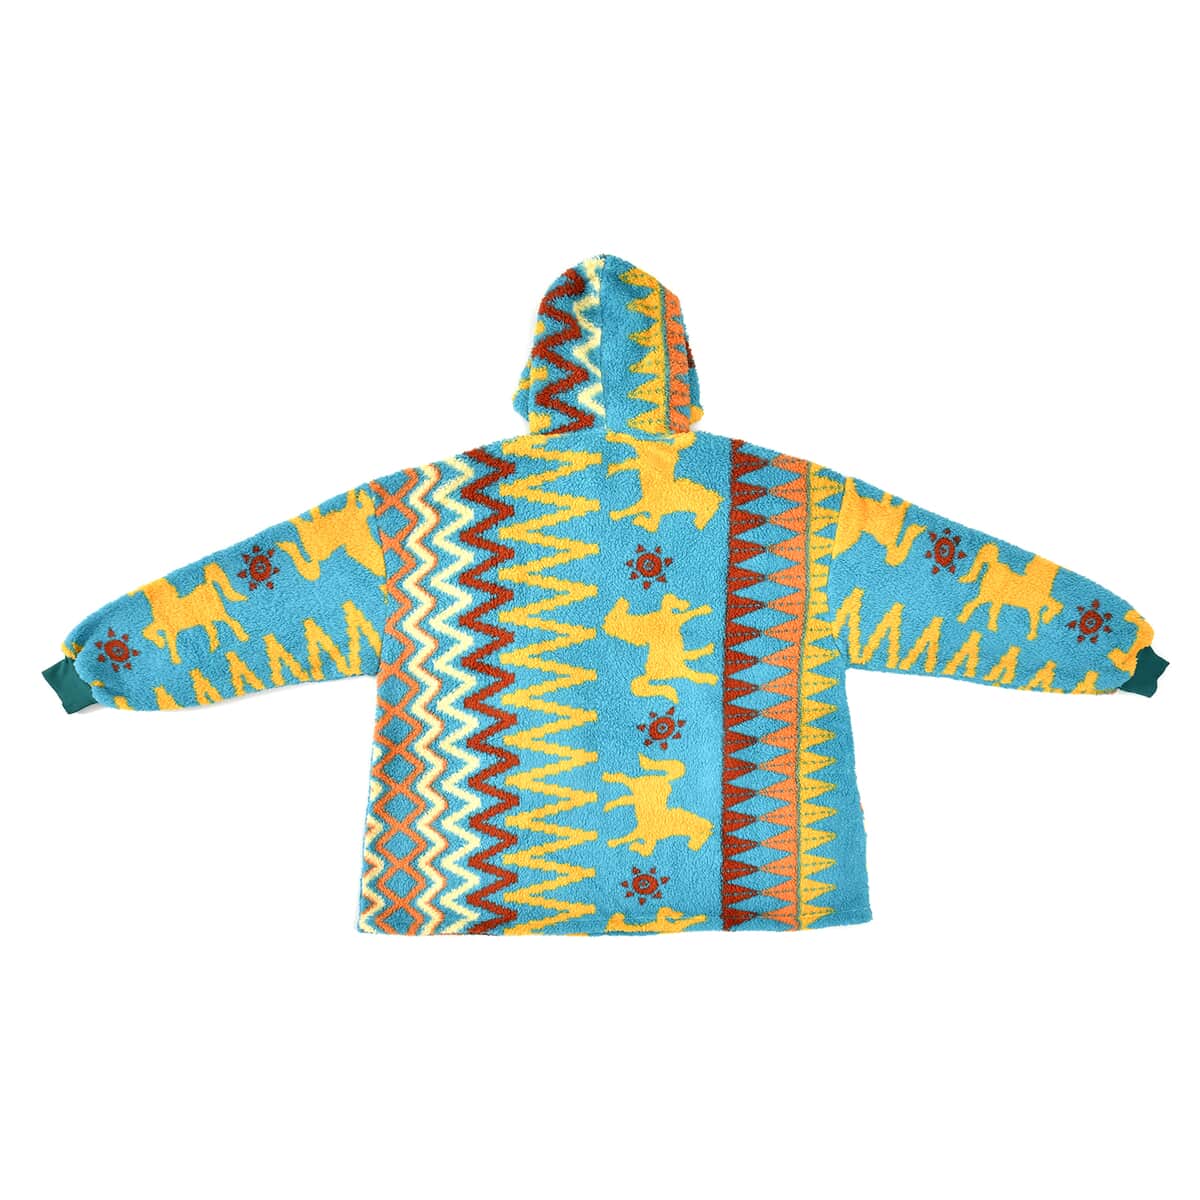 Homesmart Teal Blue and Yellow Abstract and Tribal Pattern Sherpa Sweatshirt with Hood image number 2